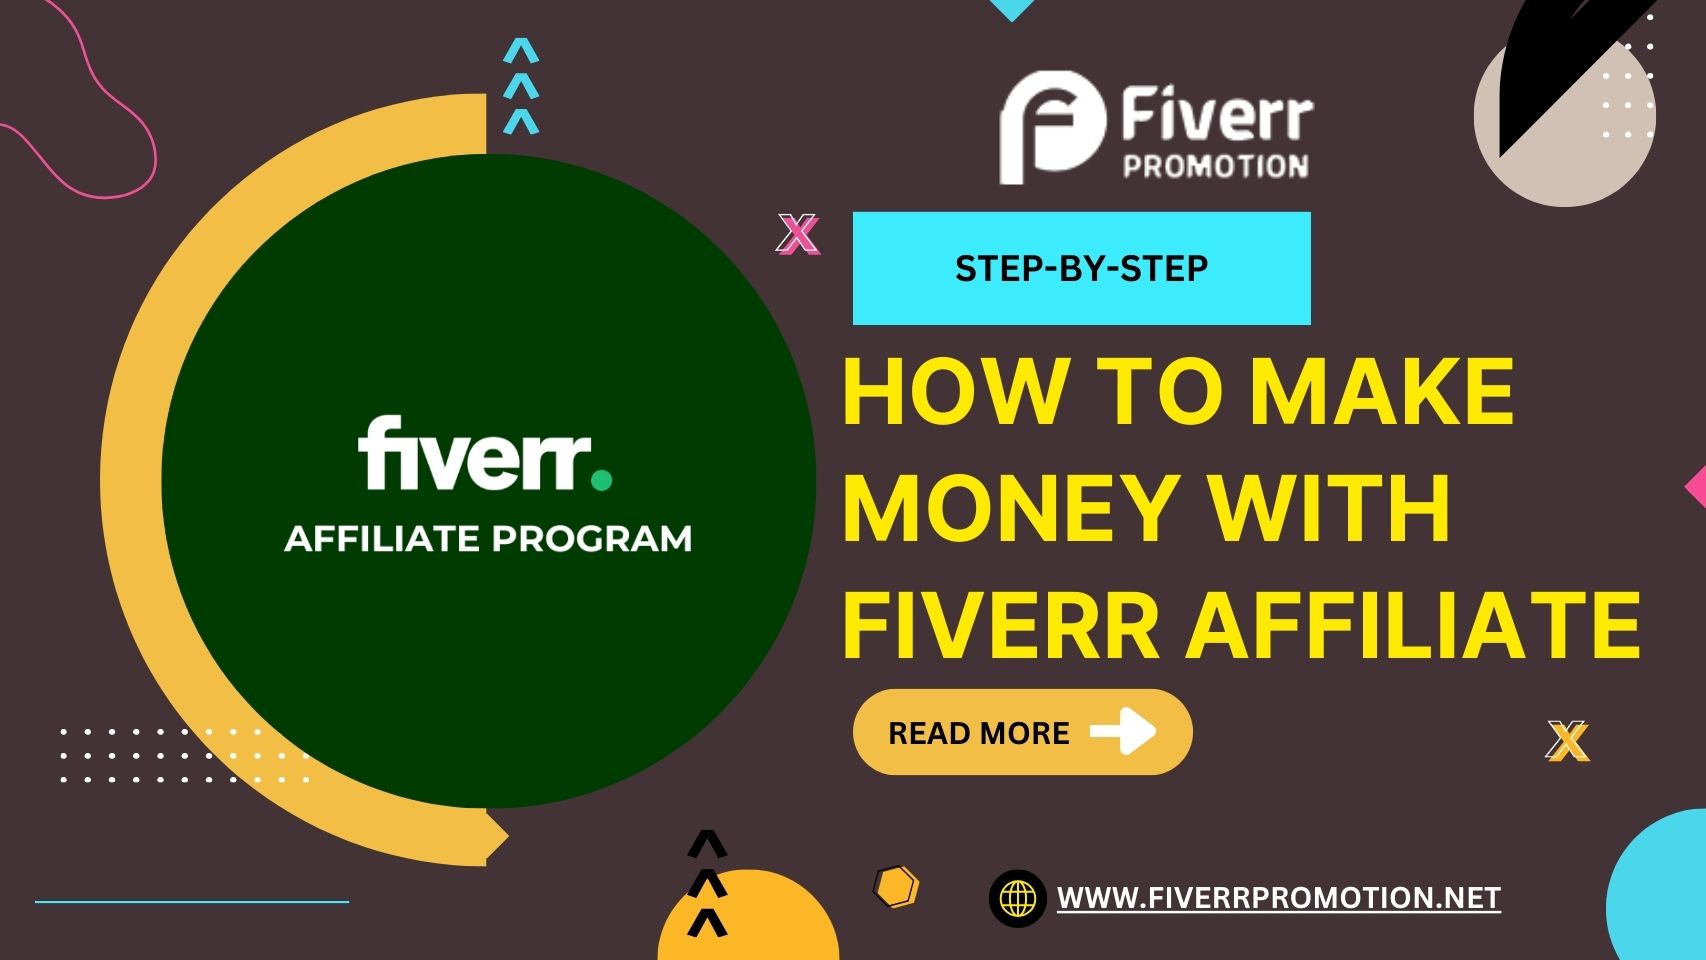 Step-by-Step: How to Make Money with Fiverr Affiliate